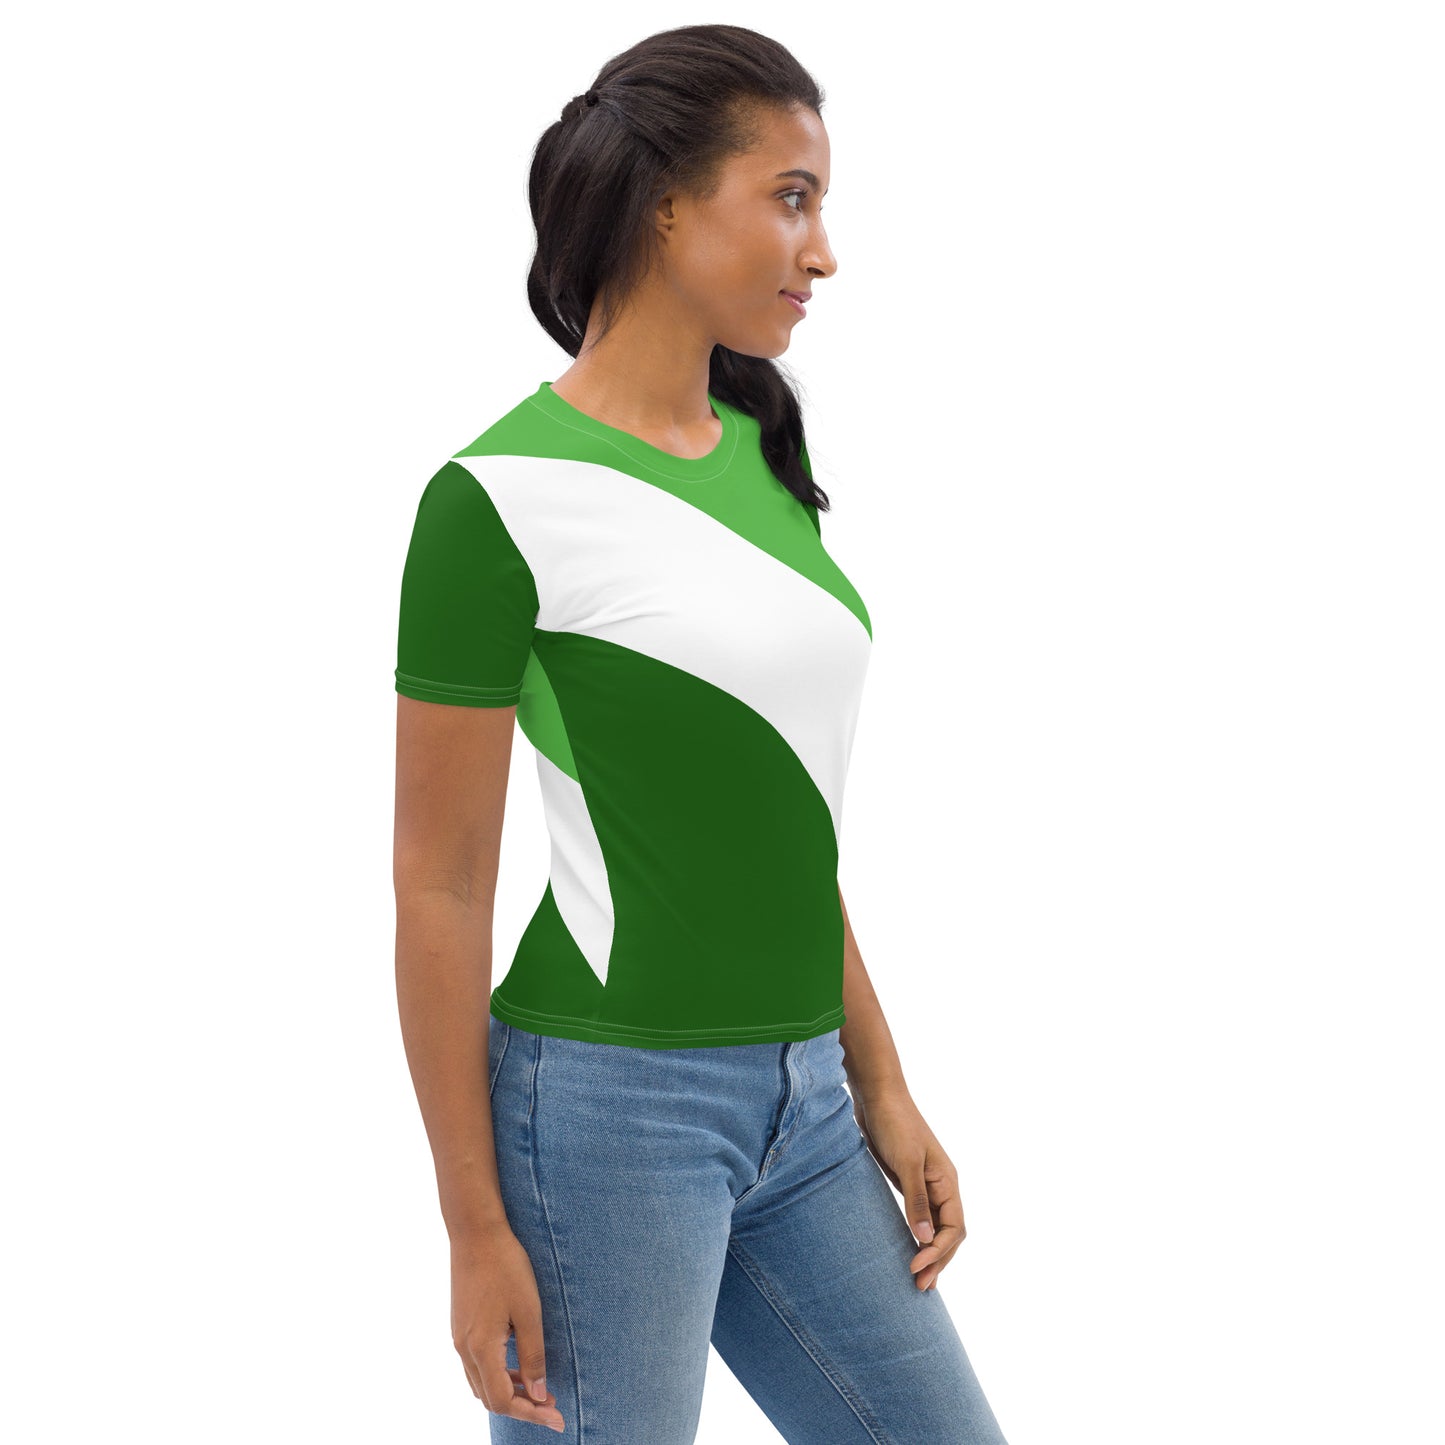 Green and White T-Shirt